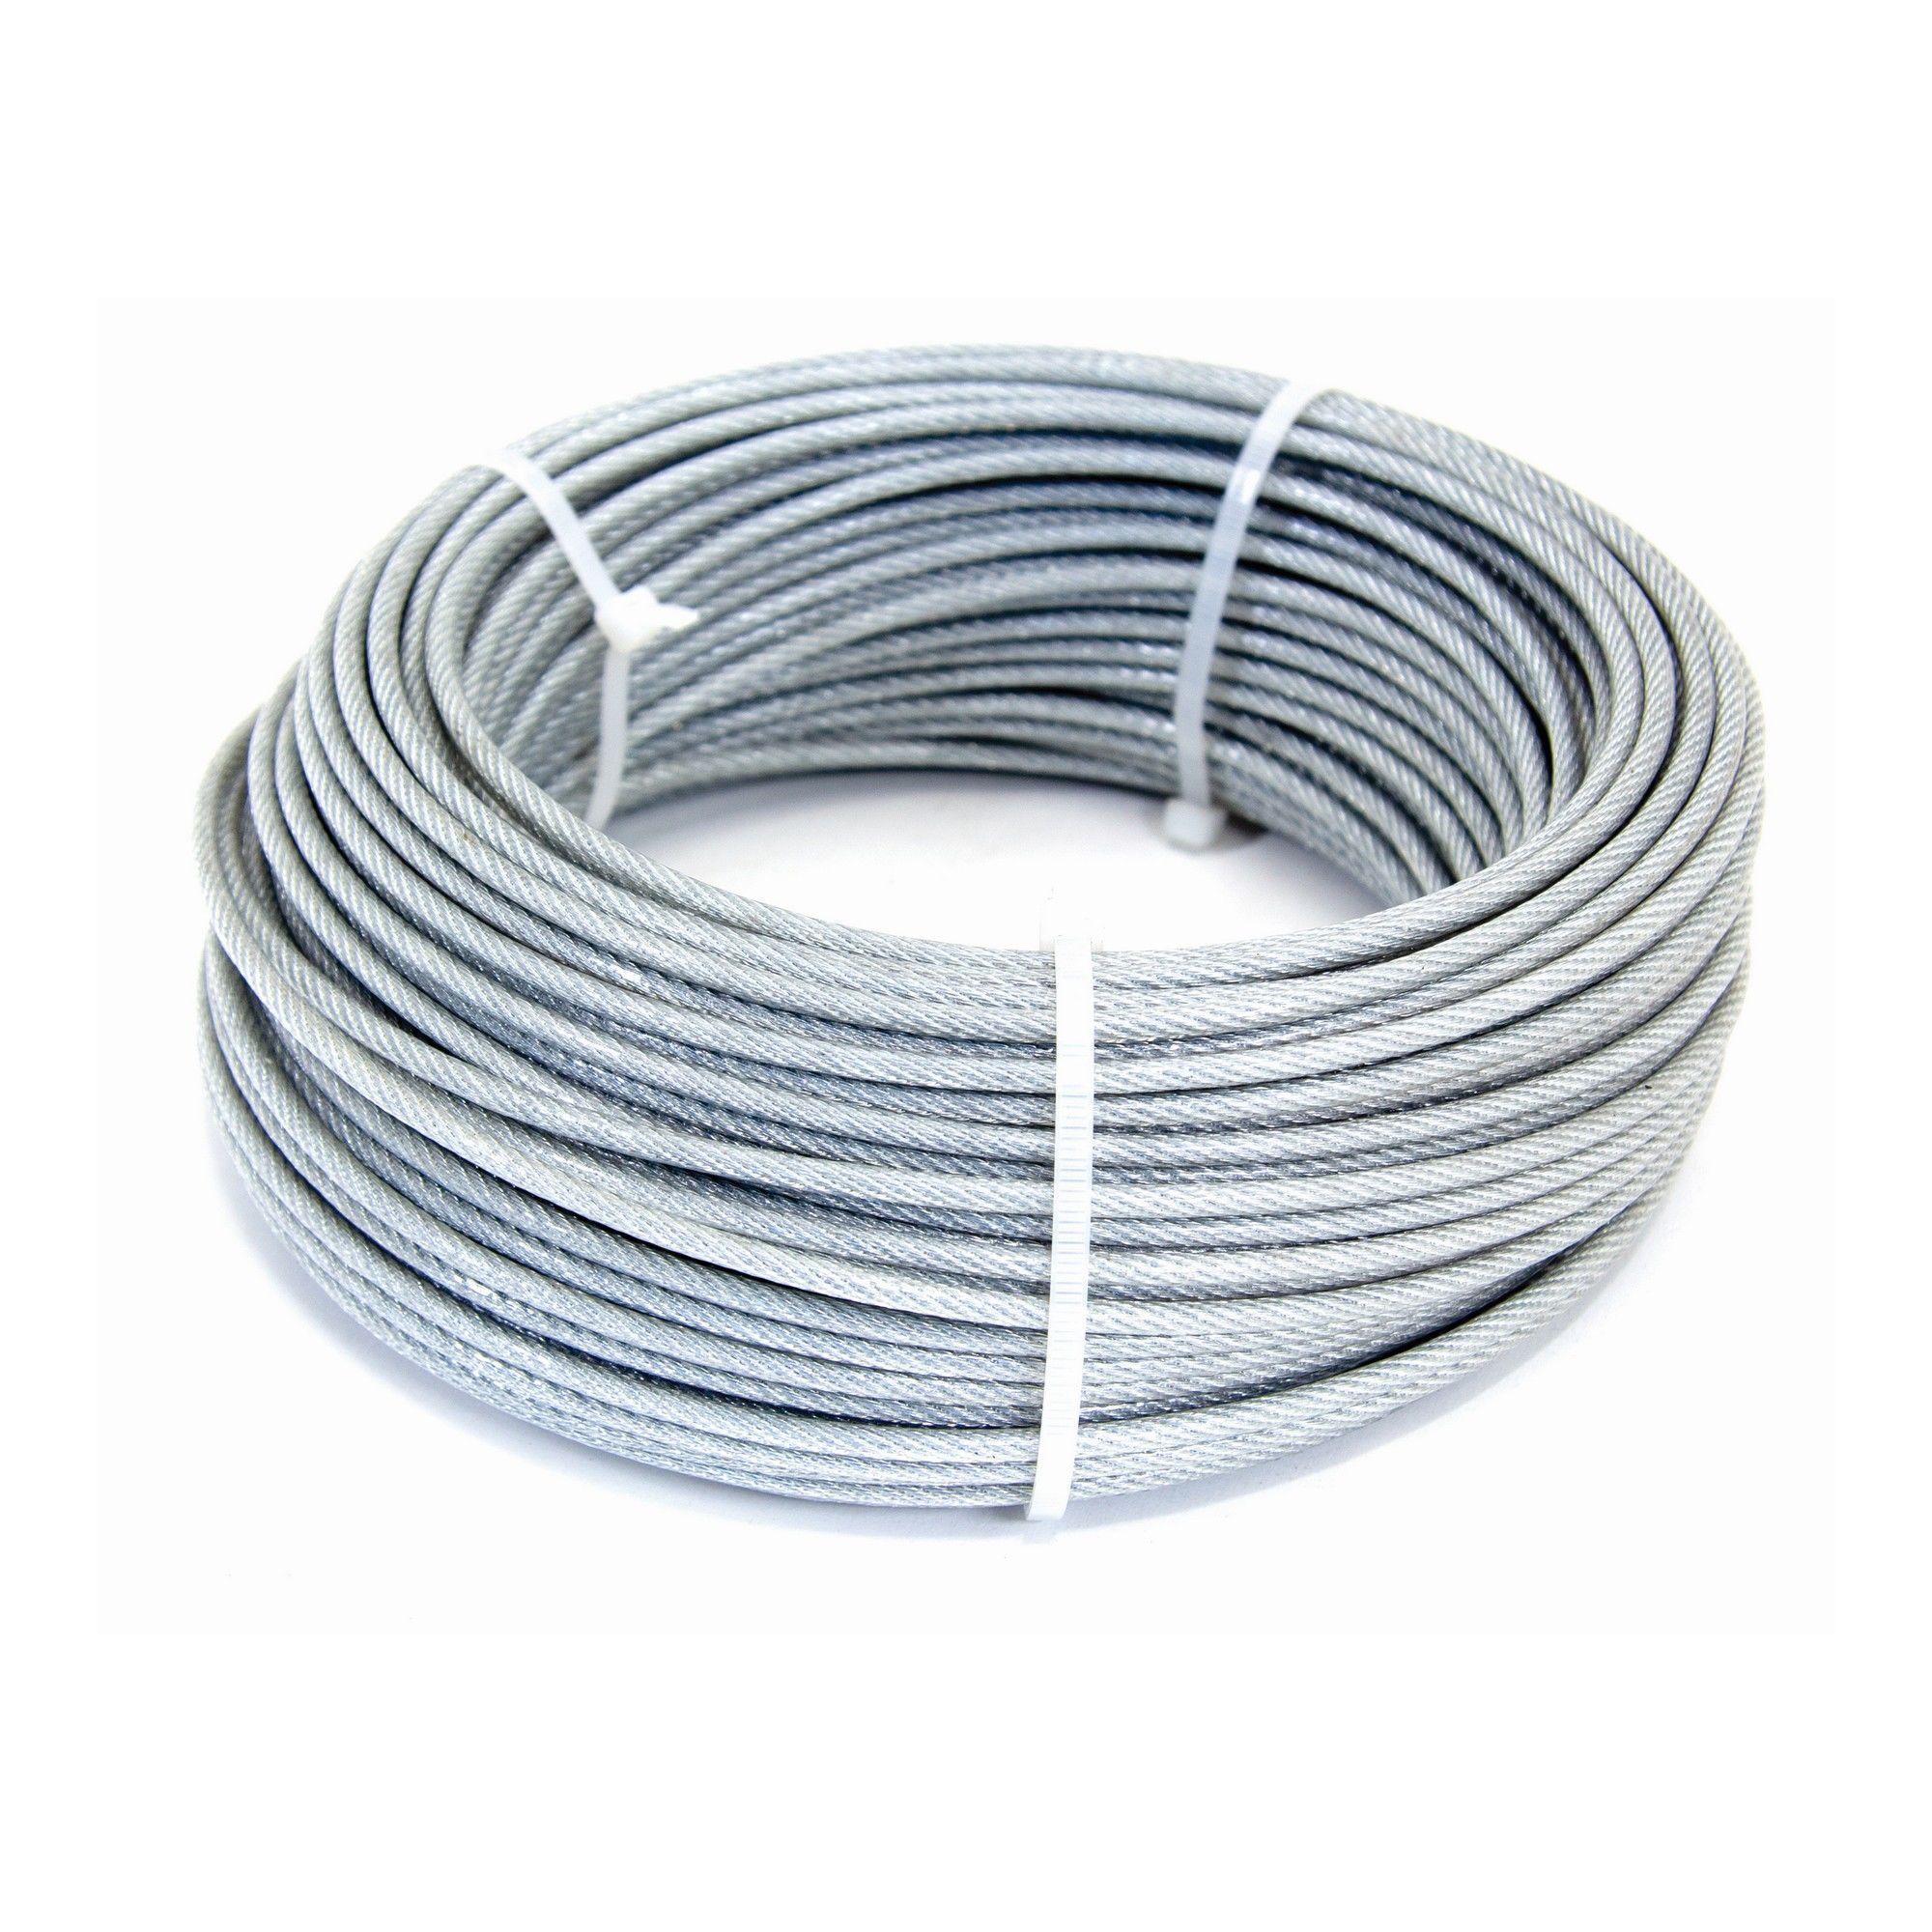 PVC Coated Clothesline Wire, 1/16 x 200' from KINGCORD